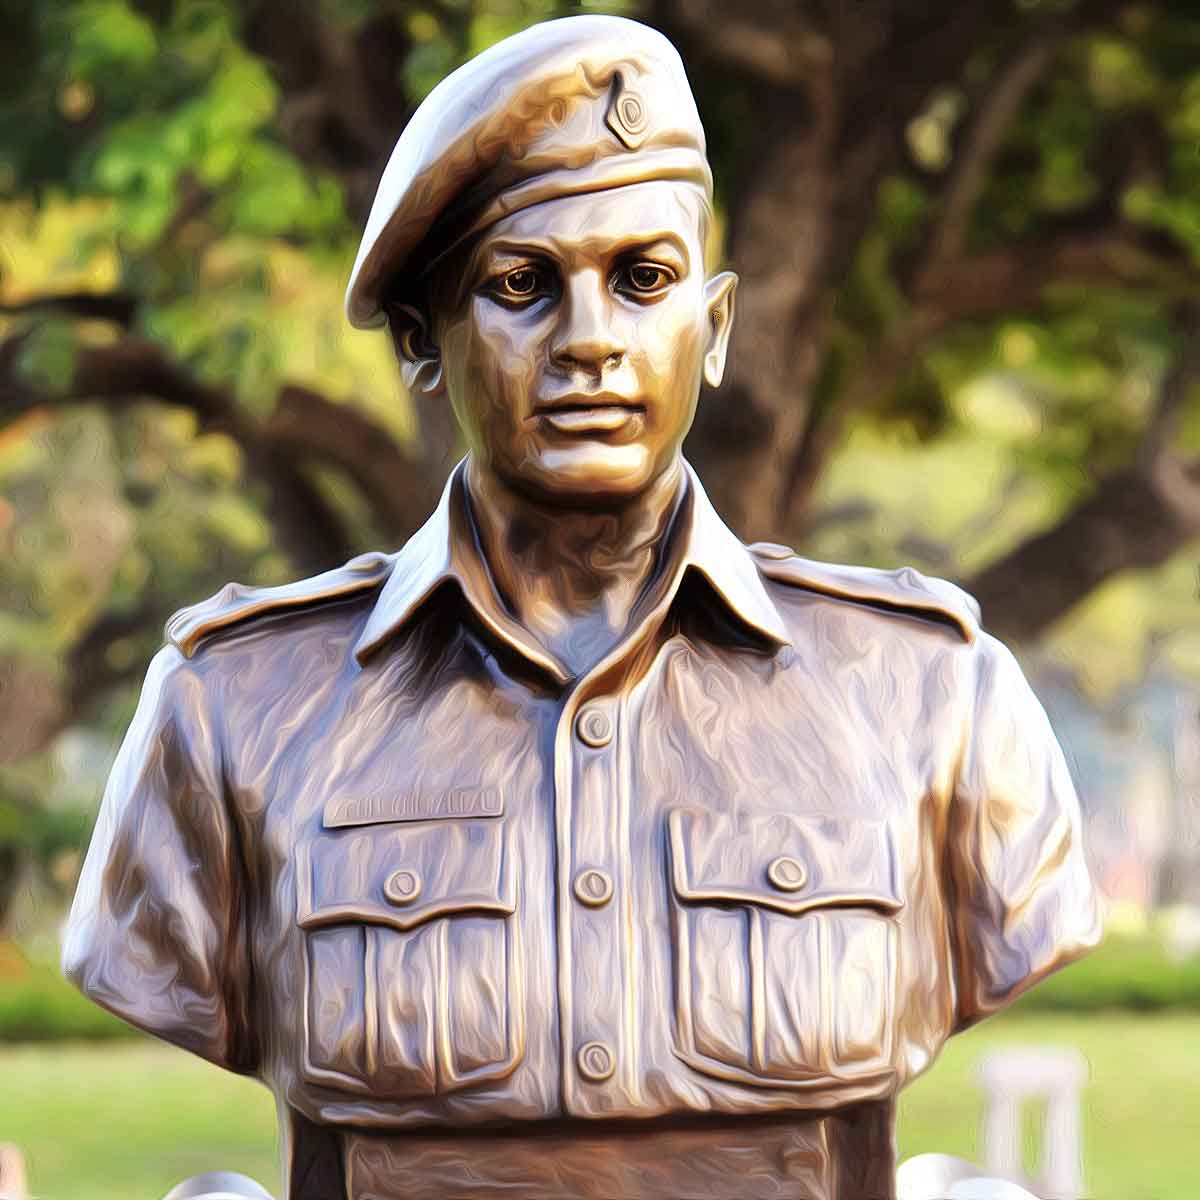 The parade ground at NDA has been named “Khetarpal Ground” in his honour